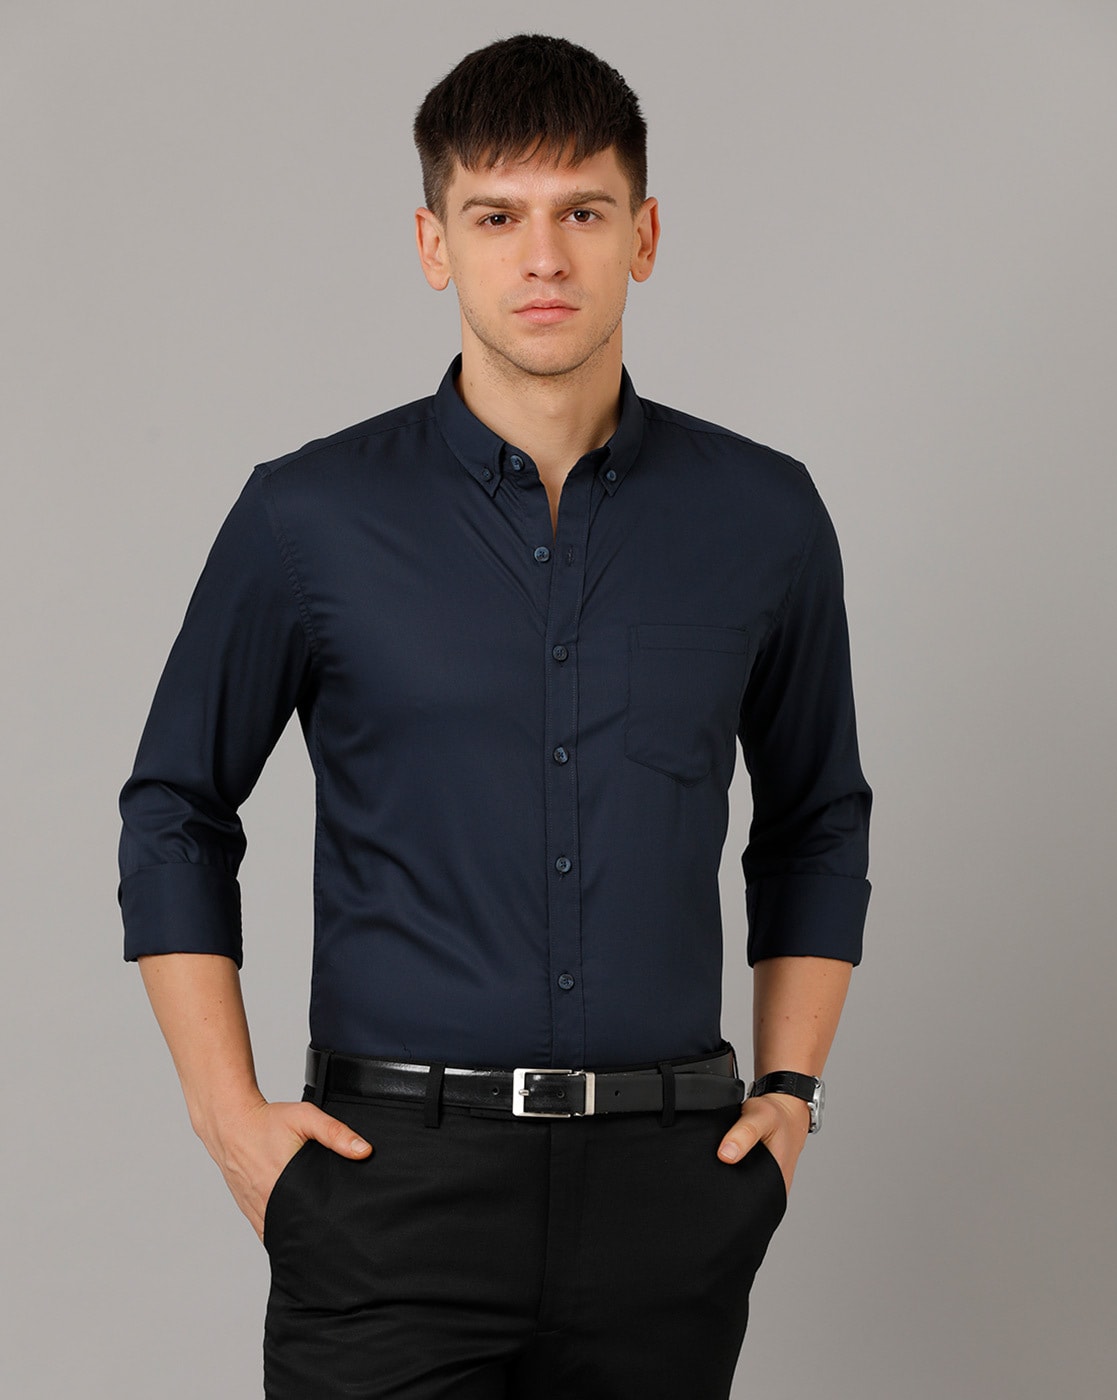 52 Best Chinos And Shirt Combinations For Men - Fashion Hombre | Black shirt  outfit men, Navy blue pants outfit, Shirt outfit men